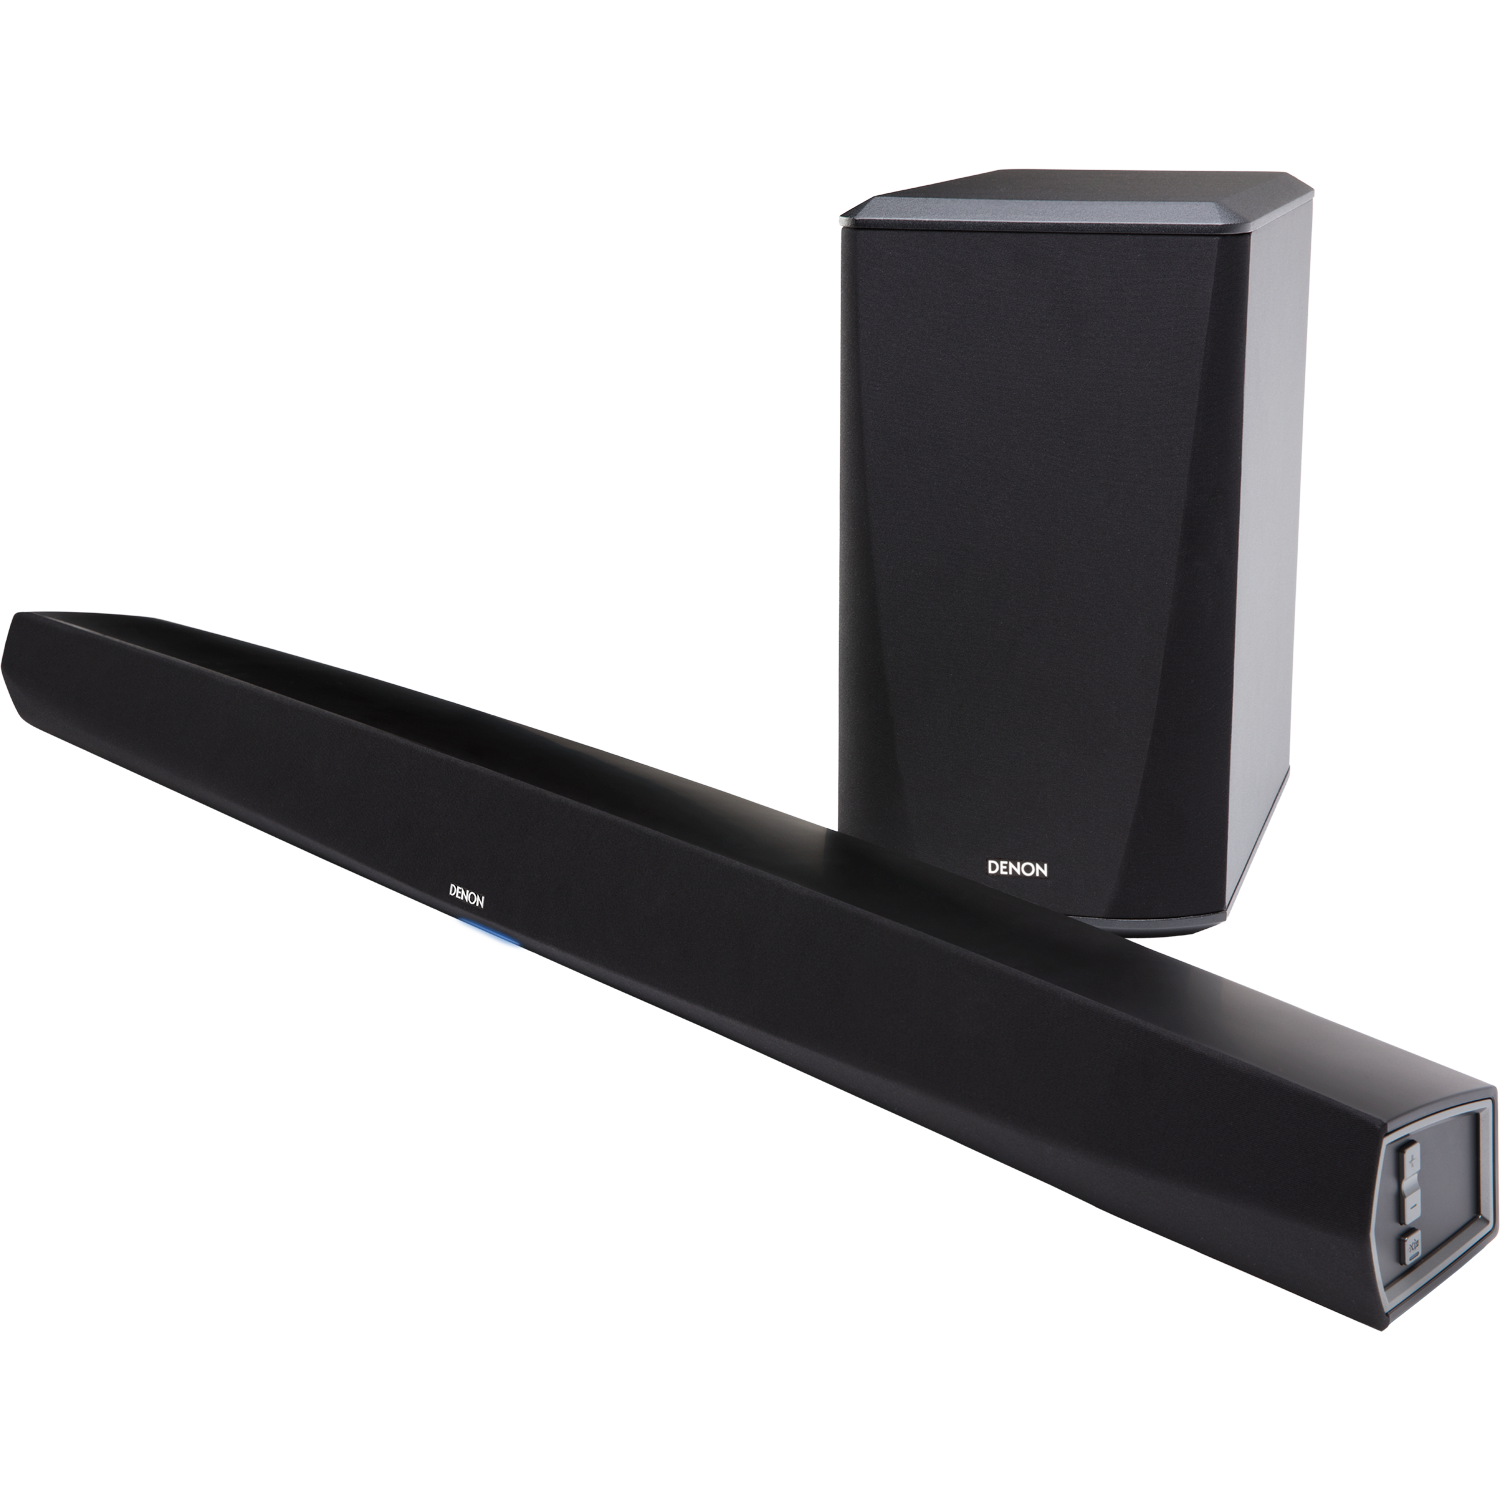 DENON DHT-S516H Sound Bar and Wireless Subwoofer with HEOS